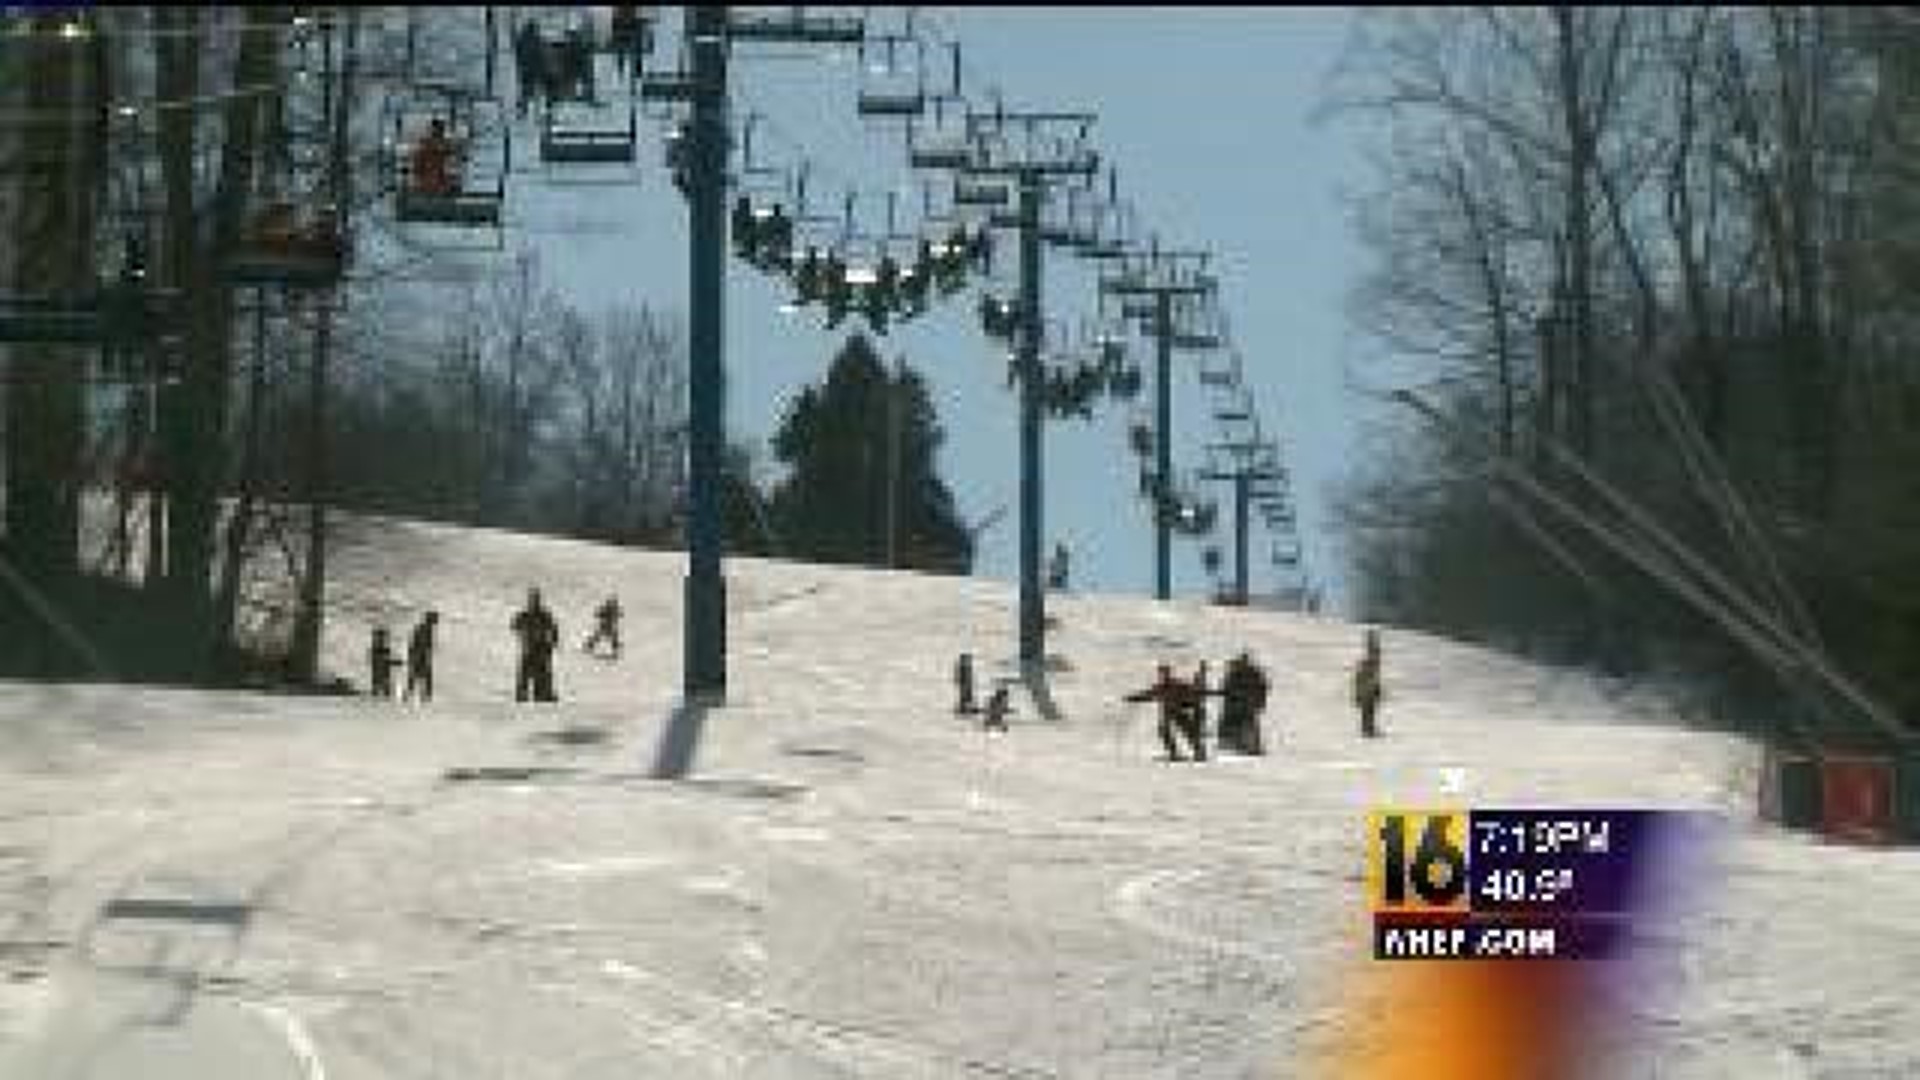 Visitors Excited for Presidents Day Skiing